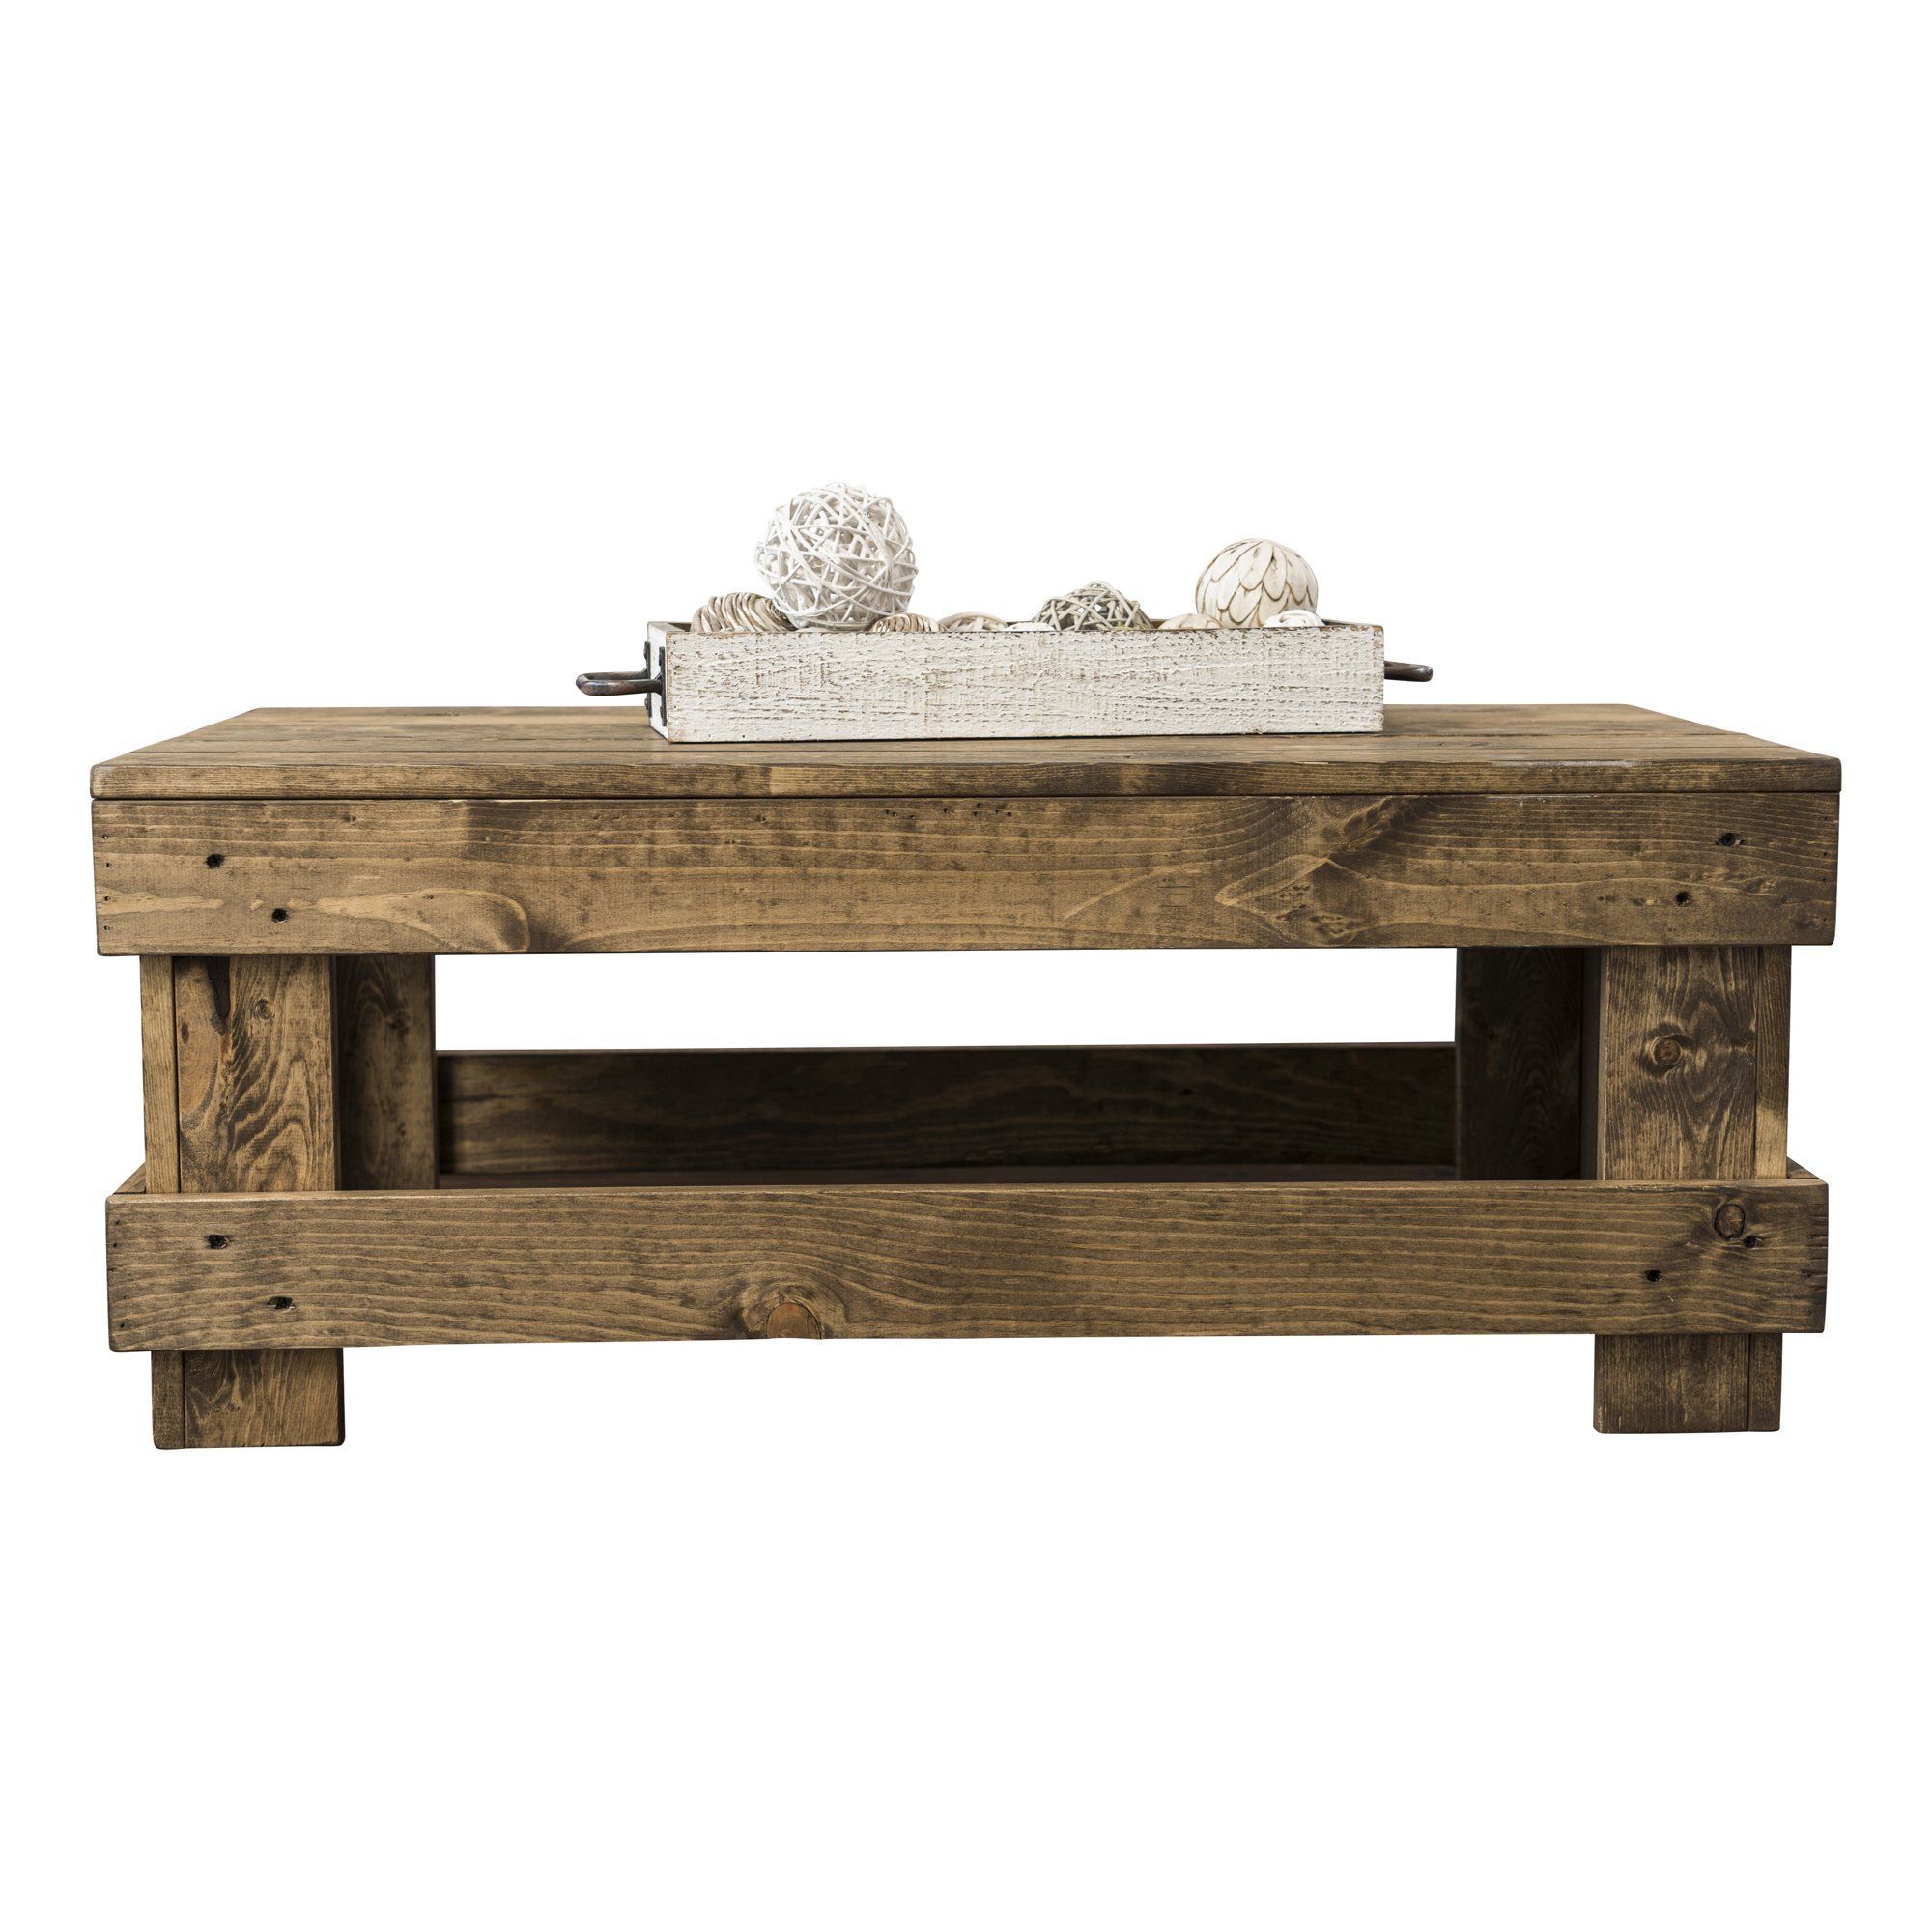 Woven Paths Landmark Pine Solid Wood Farmhouse Coffee Table, Dark Within Woven Paths Coffee Tables (View 5 of 15)